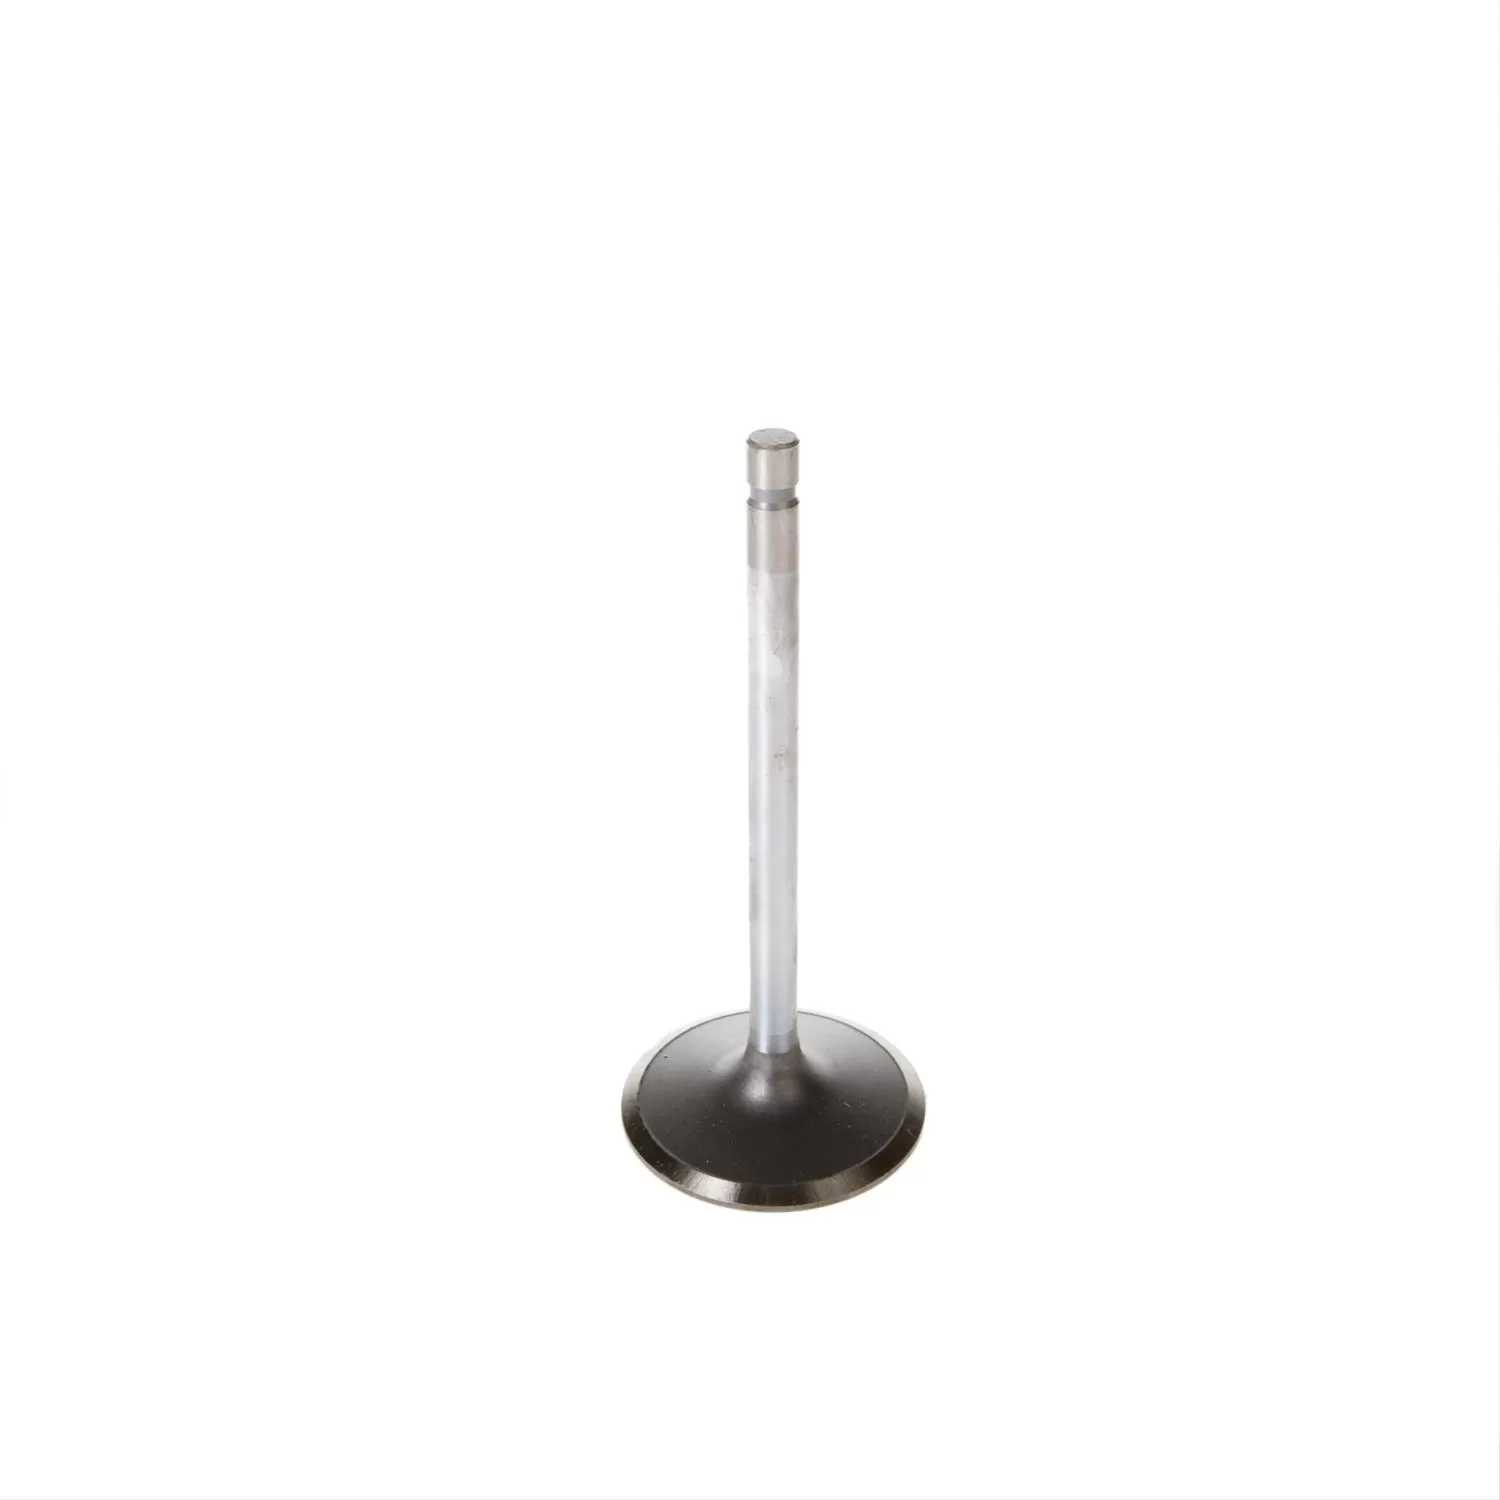 Melling Stock Replacement Intake Valve - V1166